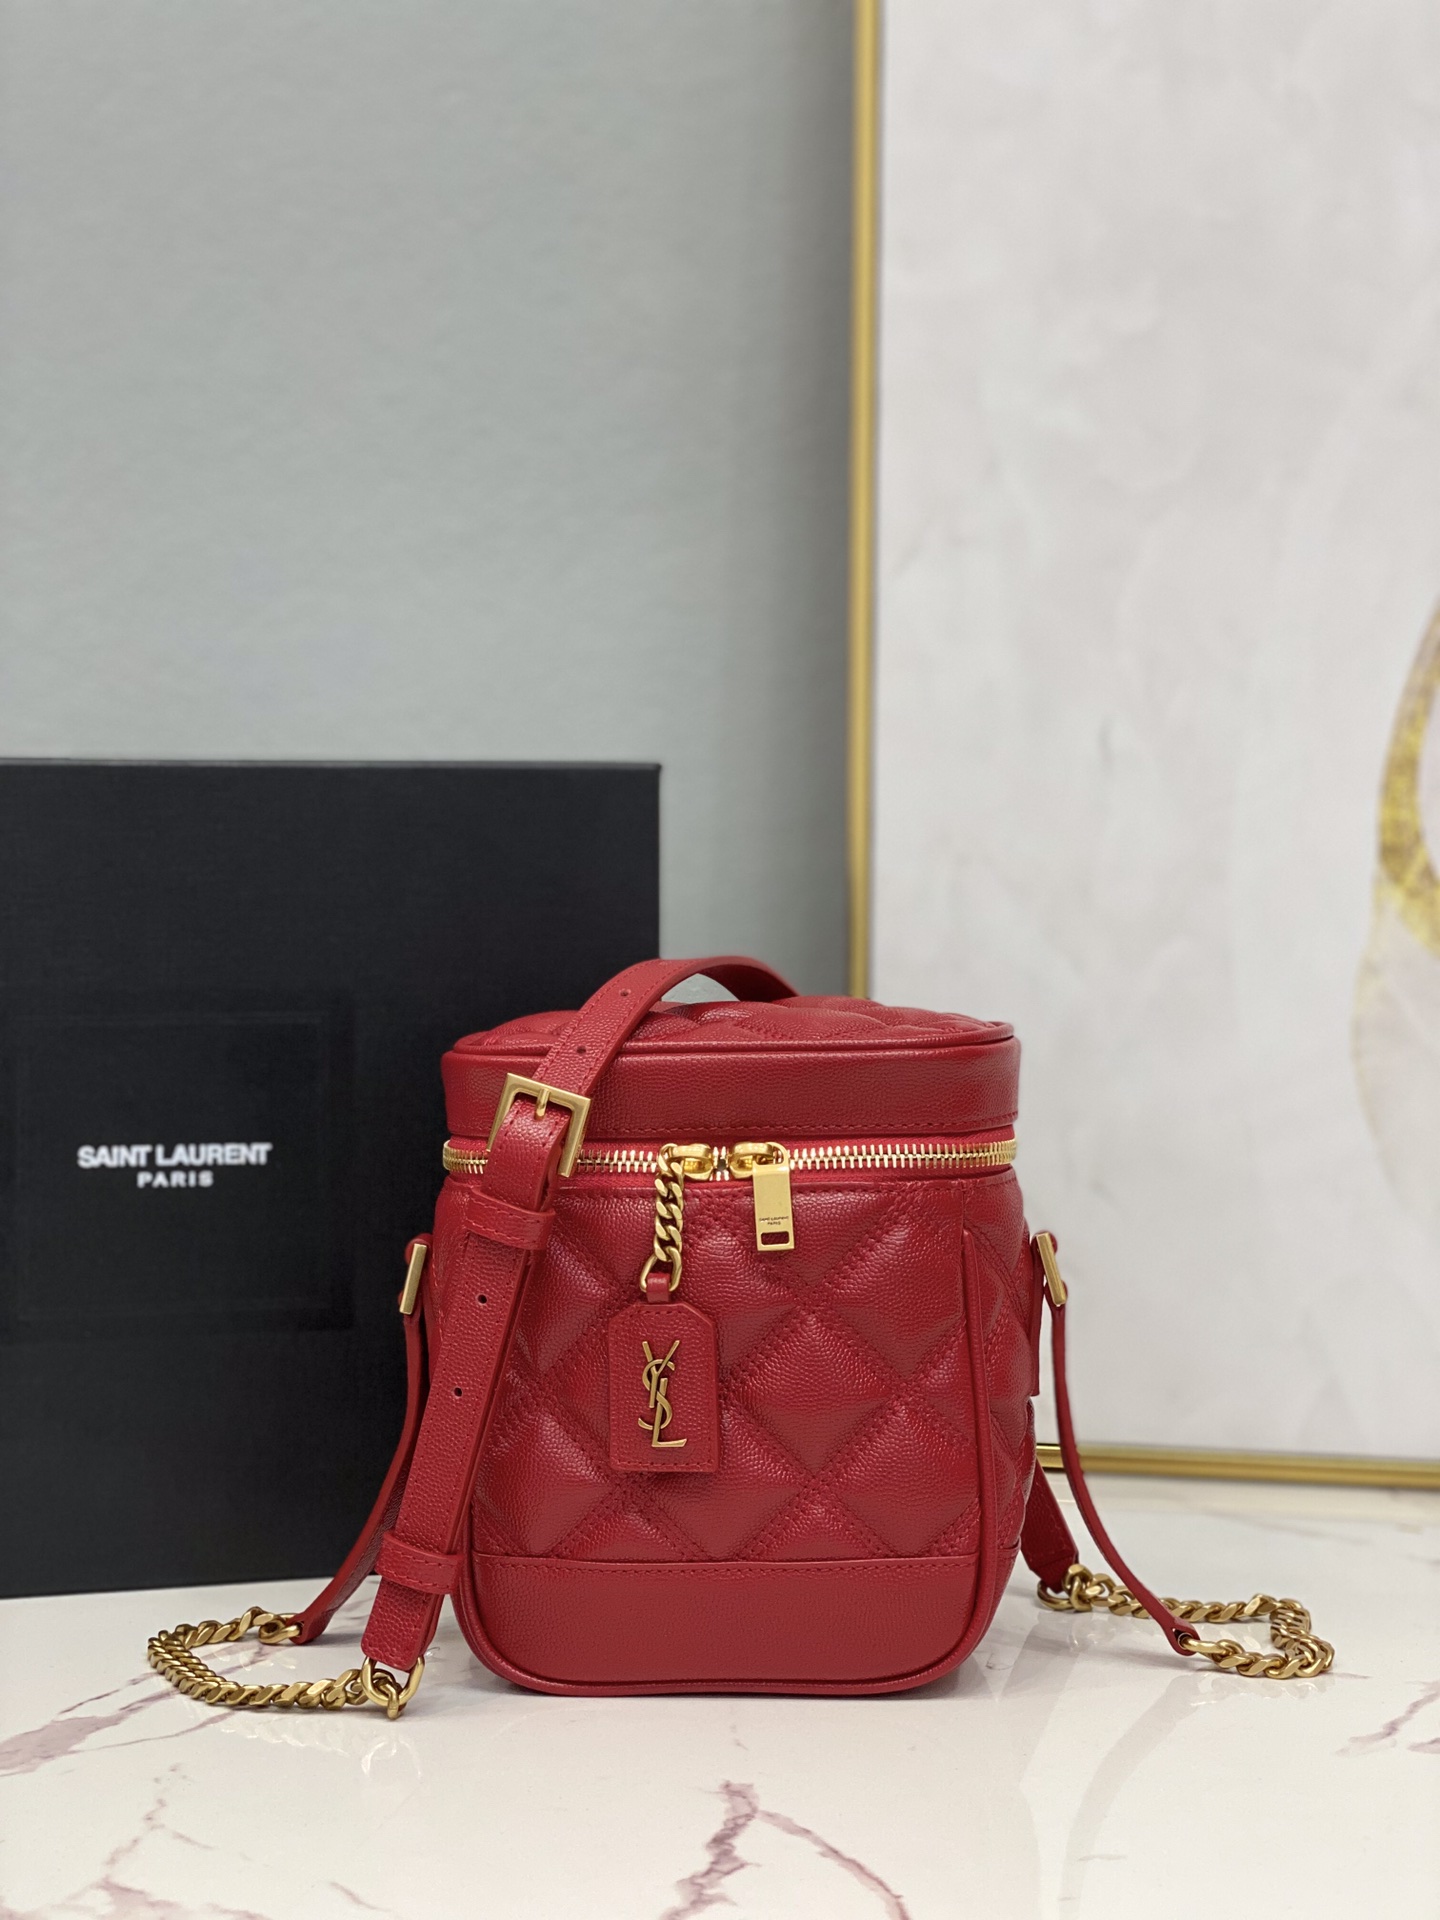 2021 Saint Laurent 80's vanity bag in carre-quilted grain de poudre embossed leather red